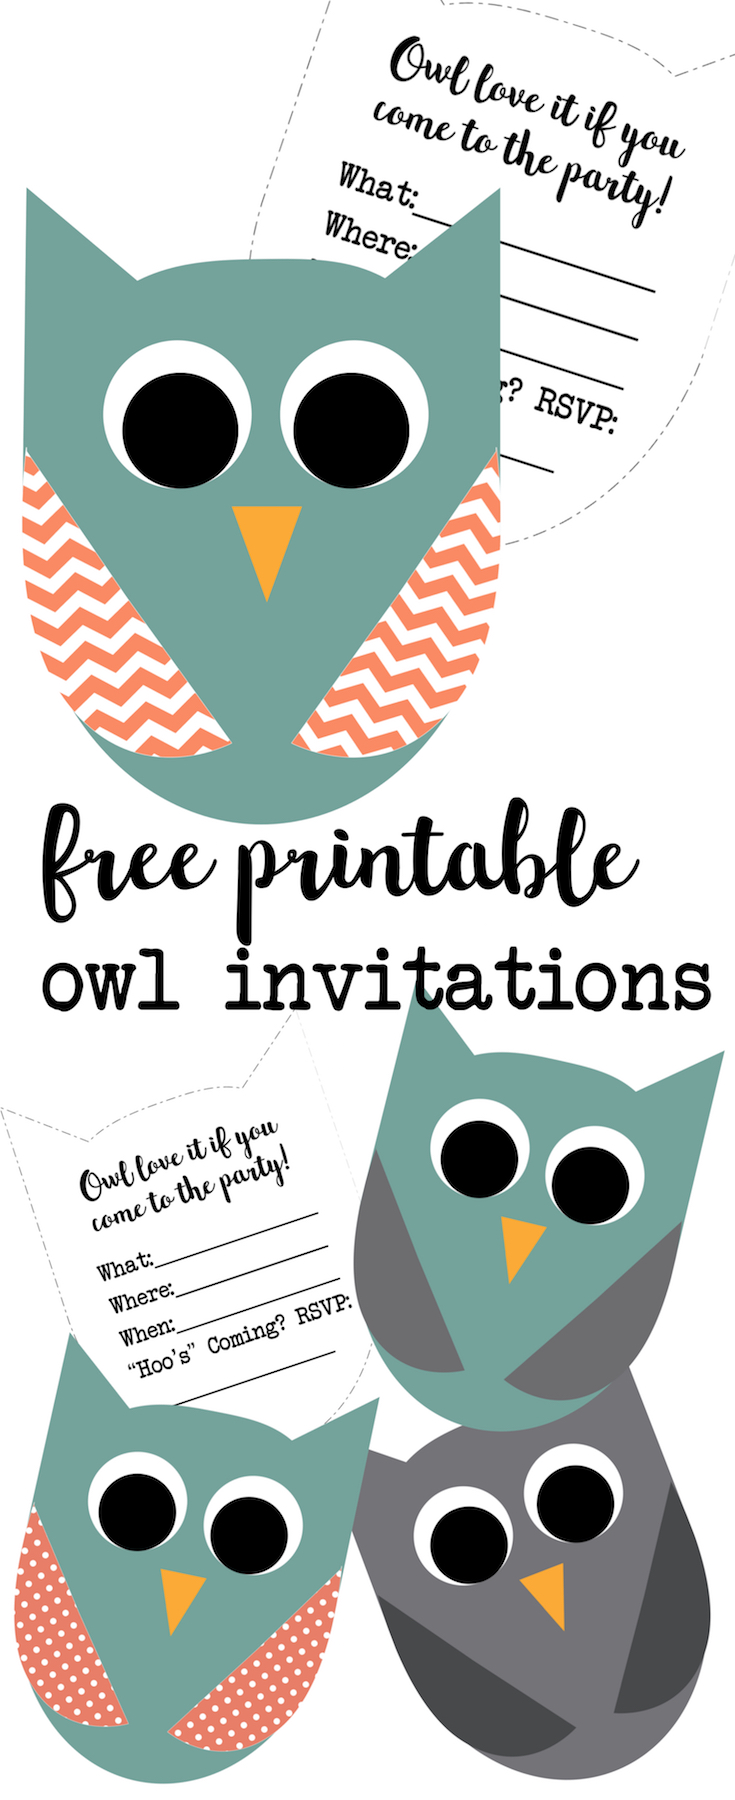 Free Printable Owl Invitations. These cute owl invitations are great for an owl birthday invitation or an owl baby shower invitation. Free printable owl party invitations.